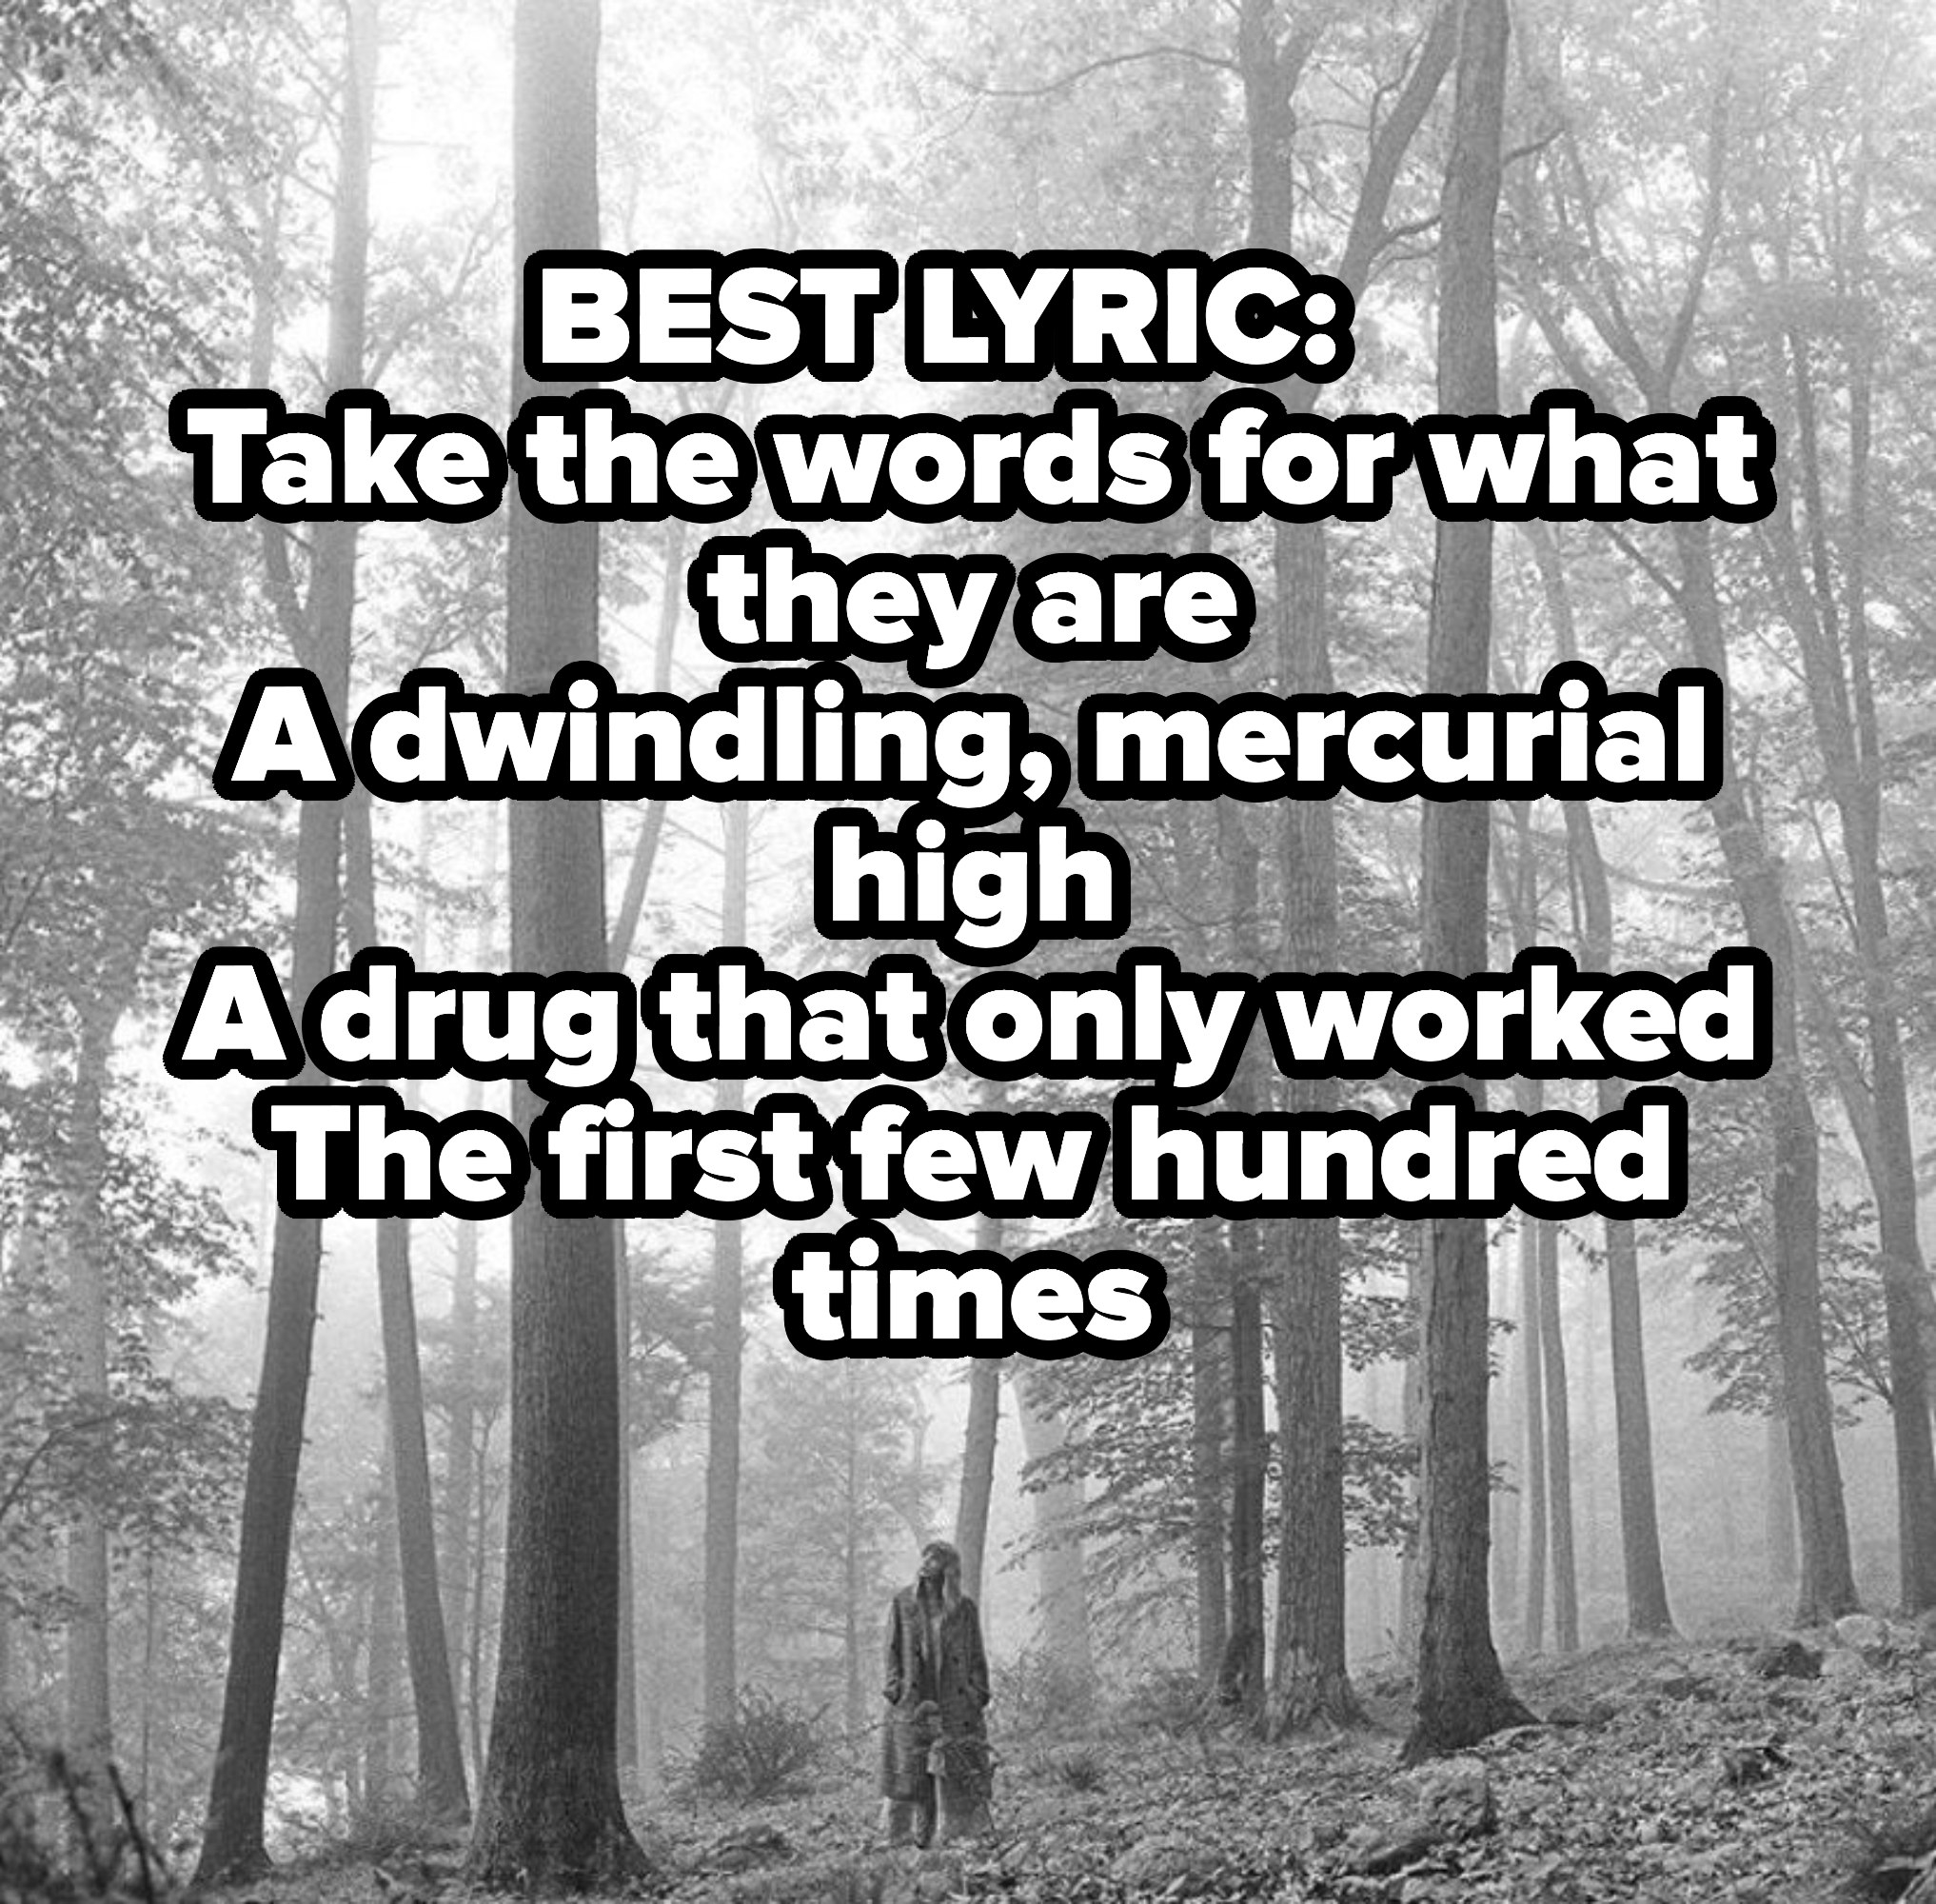 BEST LYRIC:  Take the words for what they are
A dwindling, mercurial high
A drug that only worked
The first few hundred times